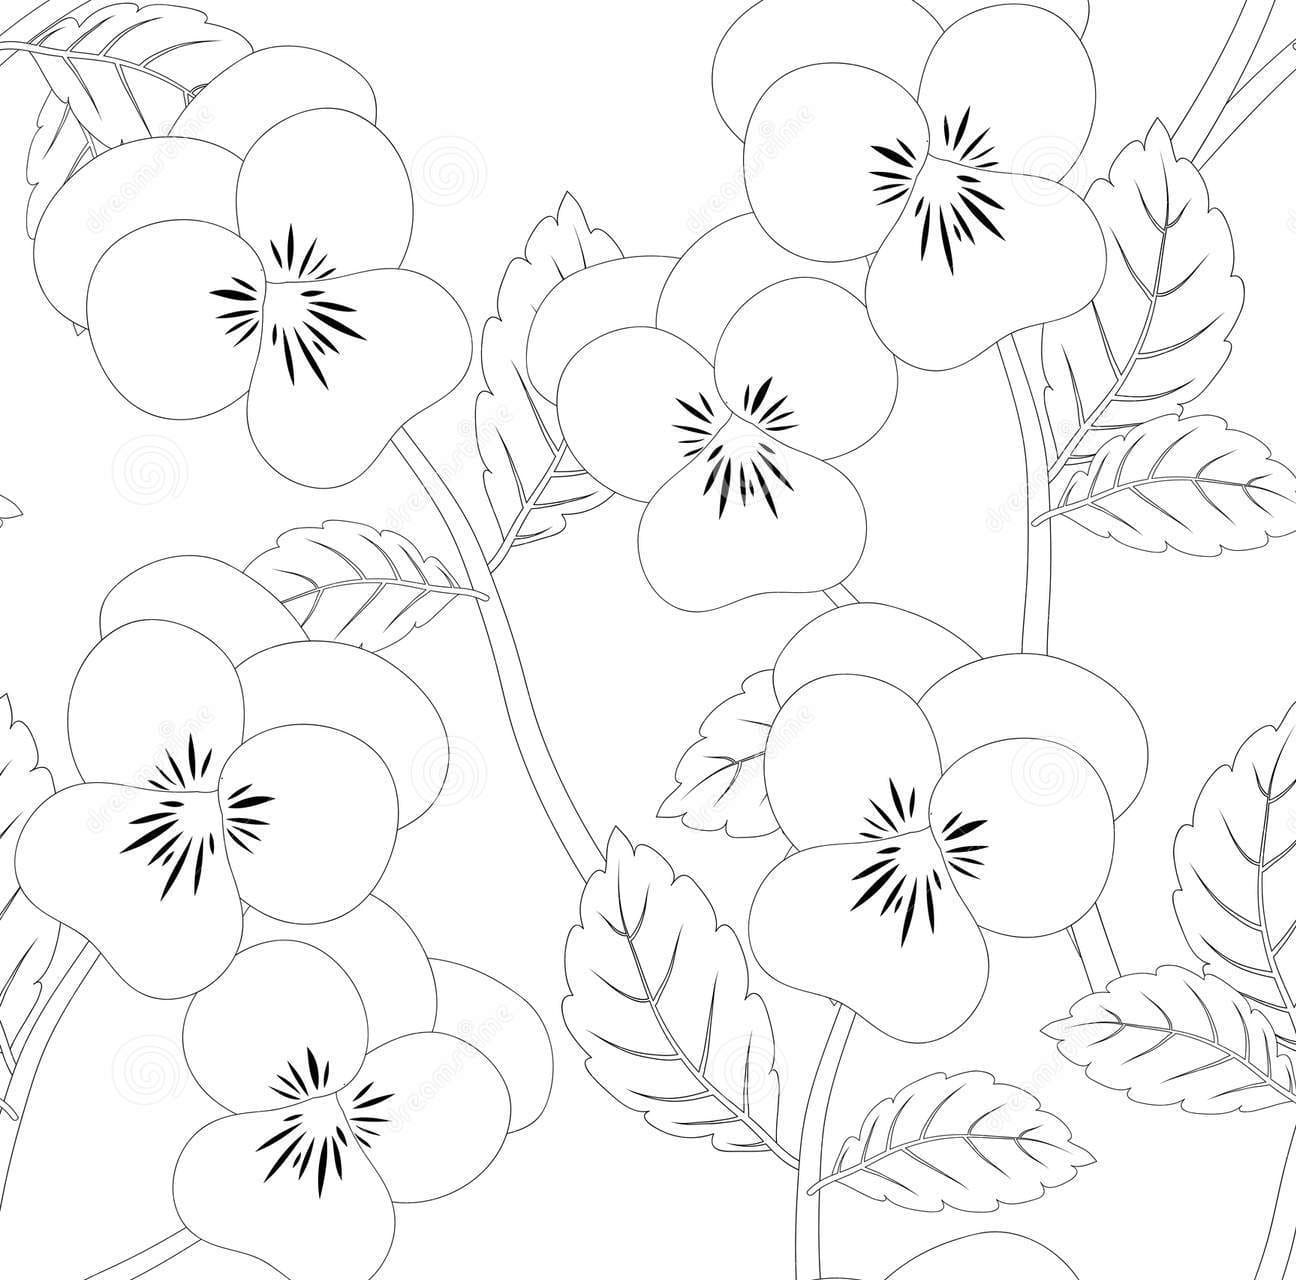 Viola Garden Pansy Flower Seamless Image Coloring Page